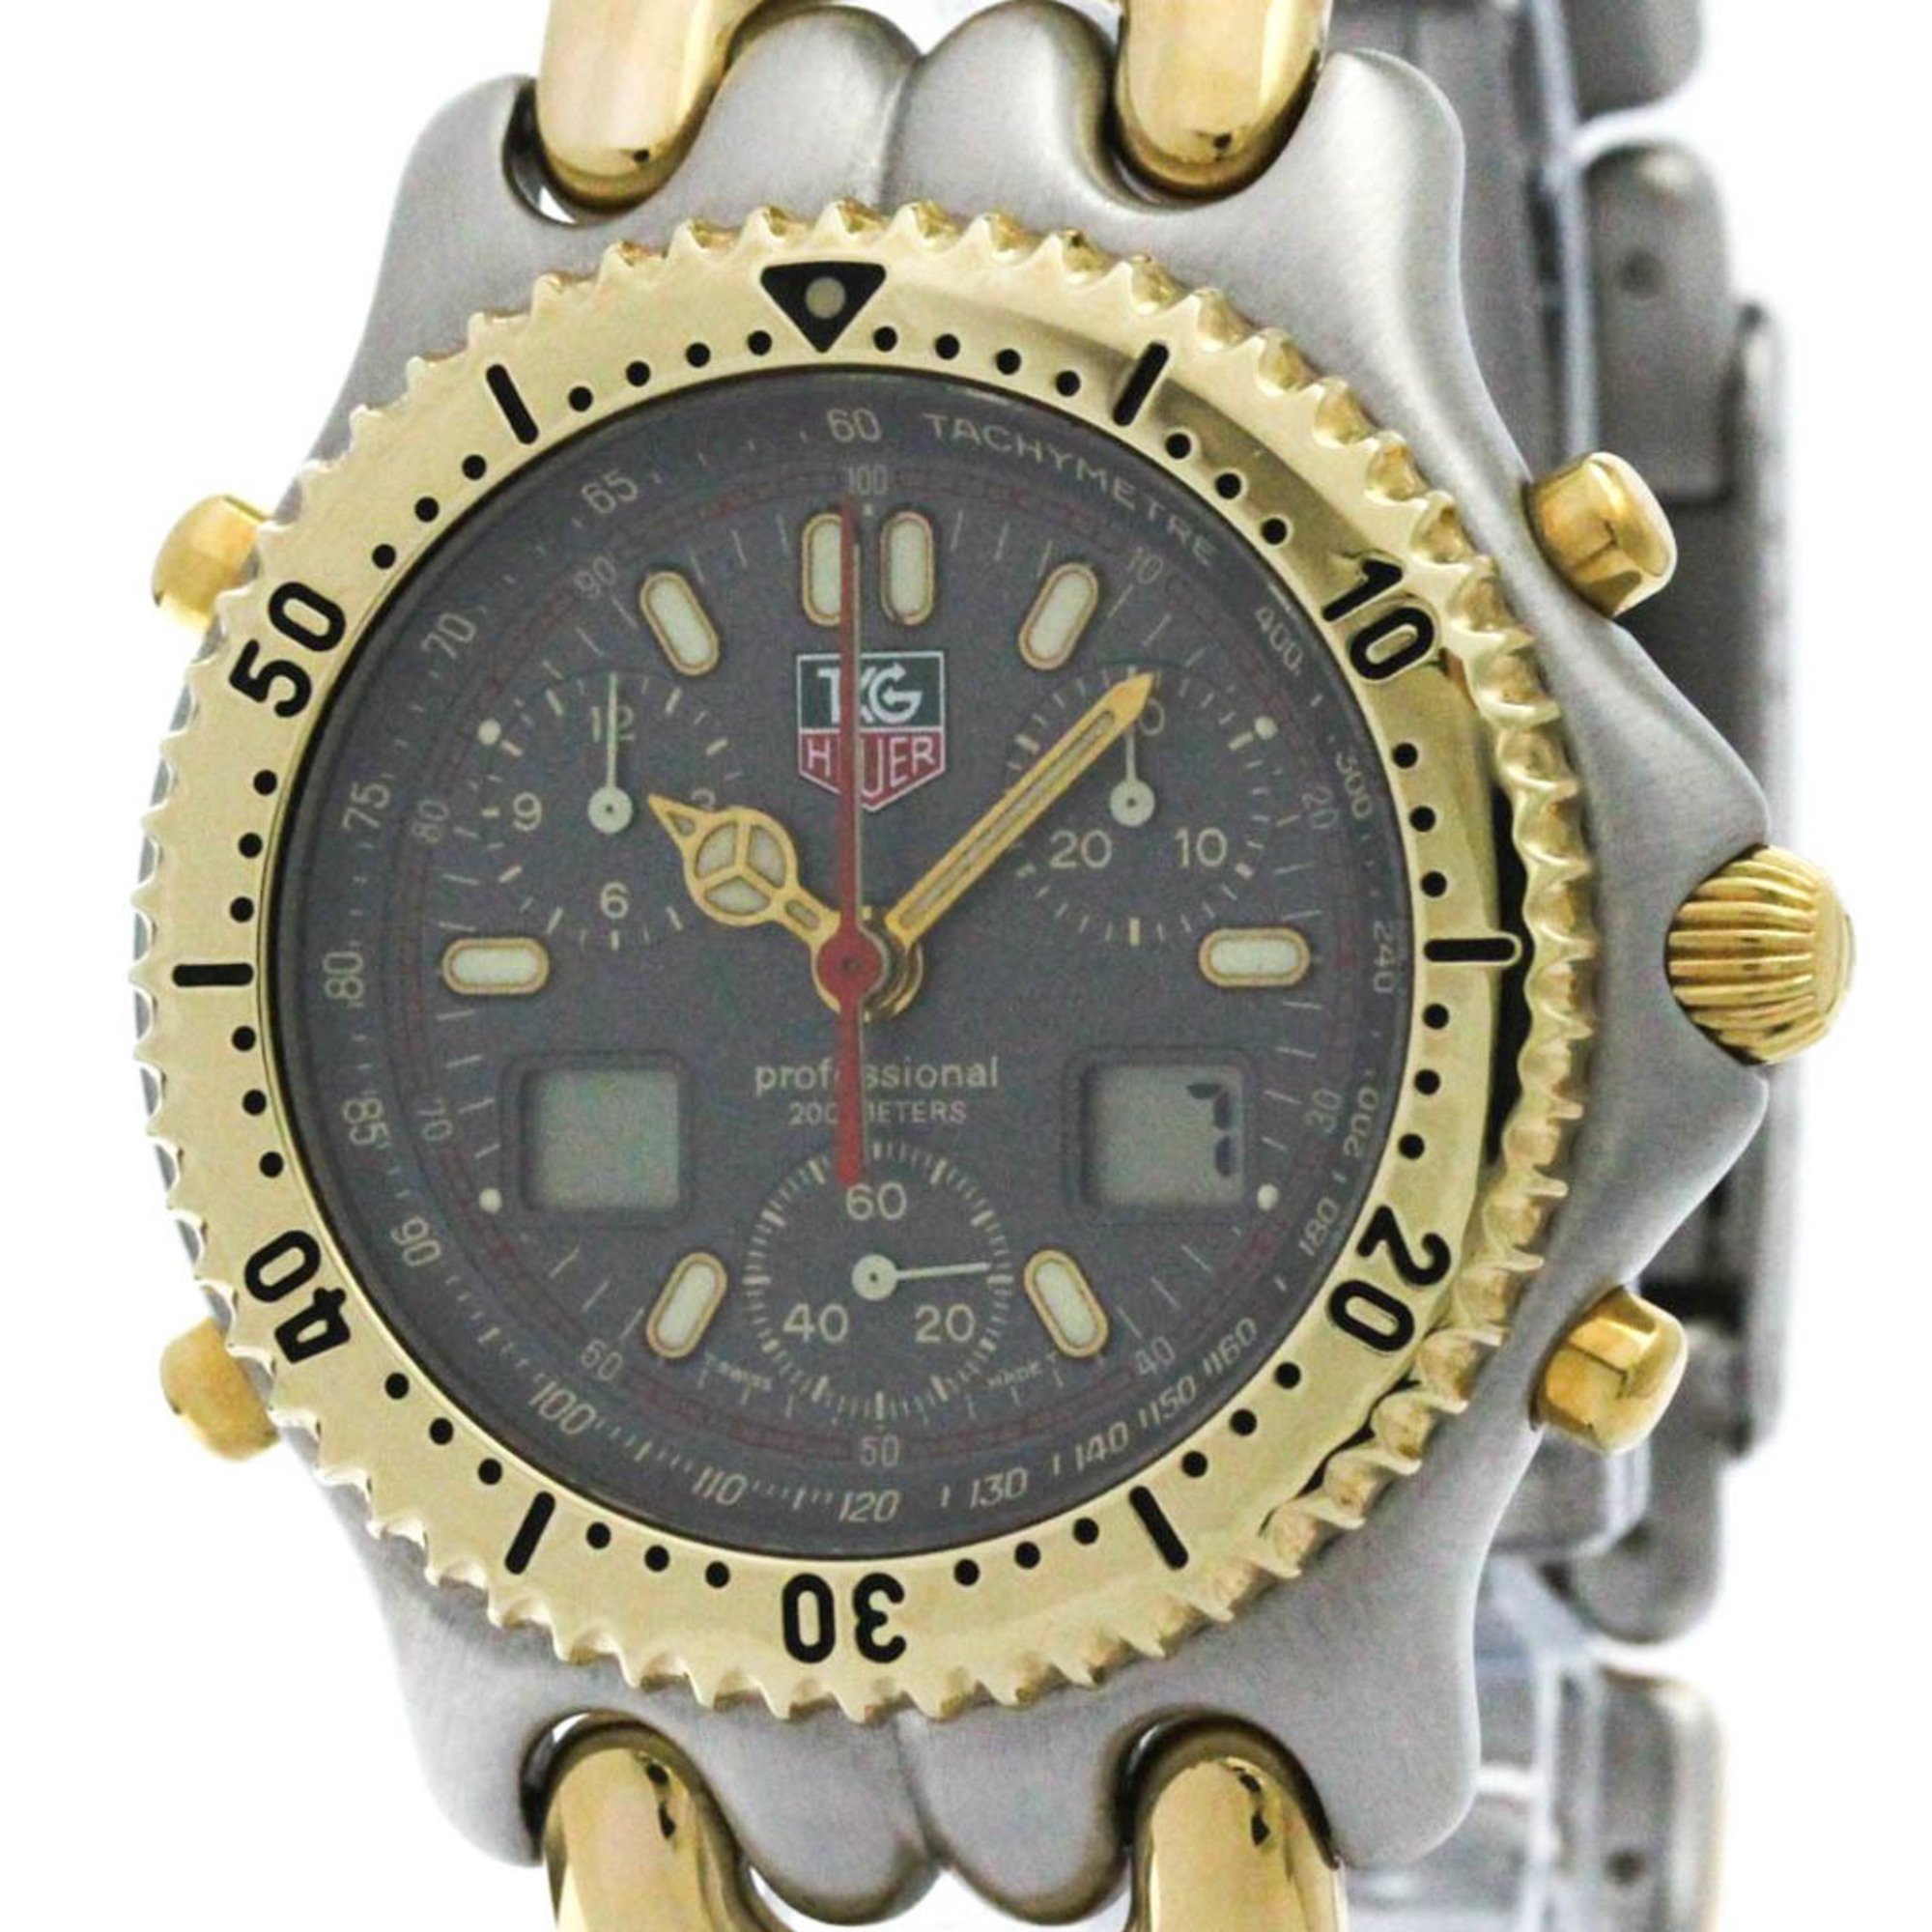 Polished TAG HEUER Sel Chronograph Gold Plated Steel Mens Watch CG1122 BF572577